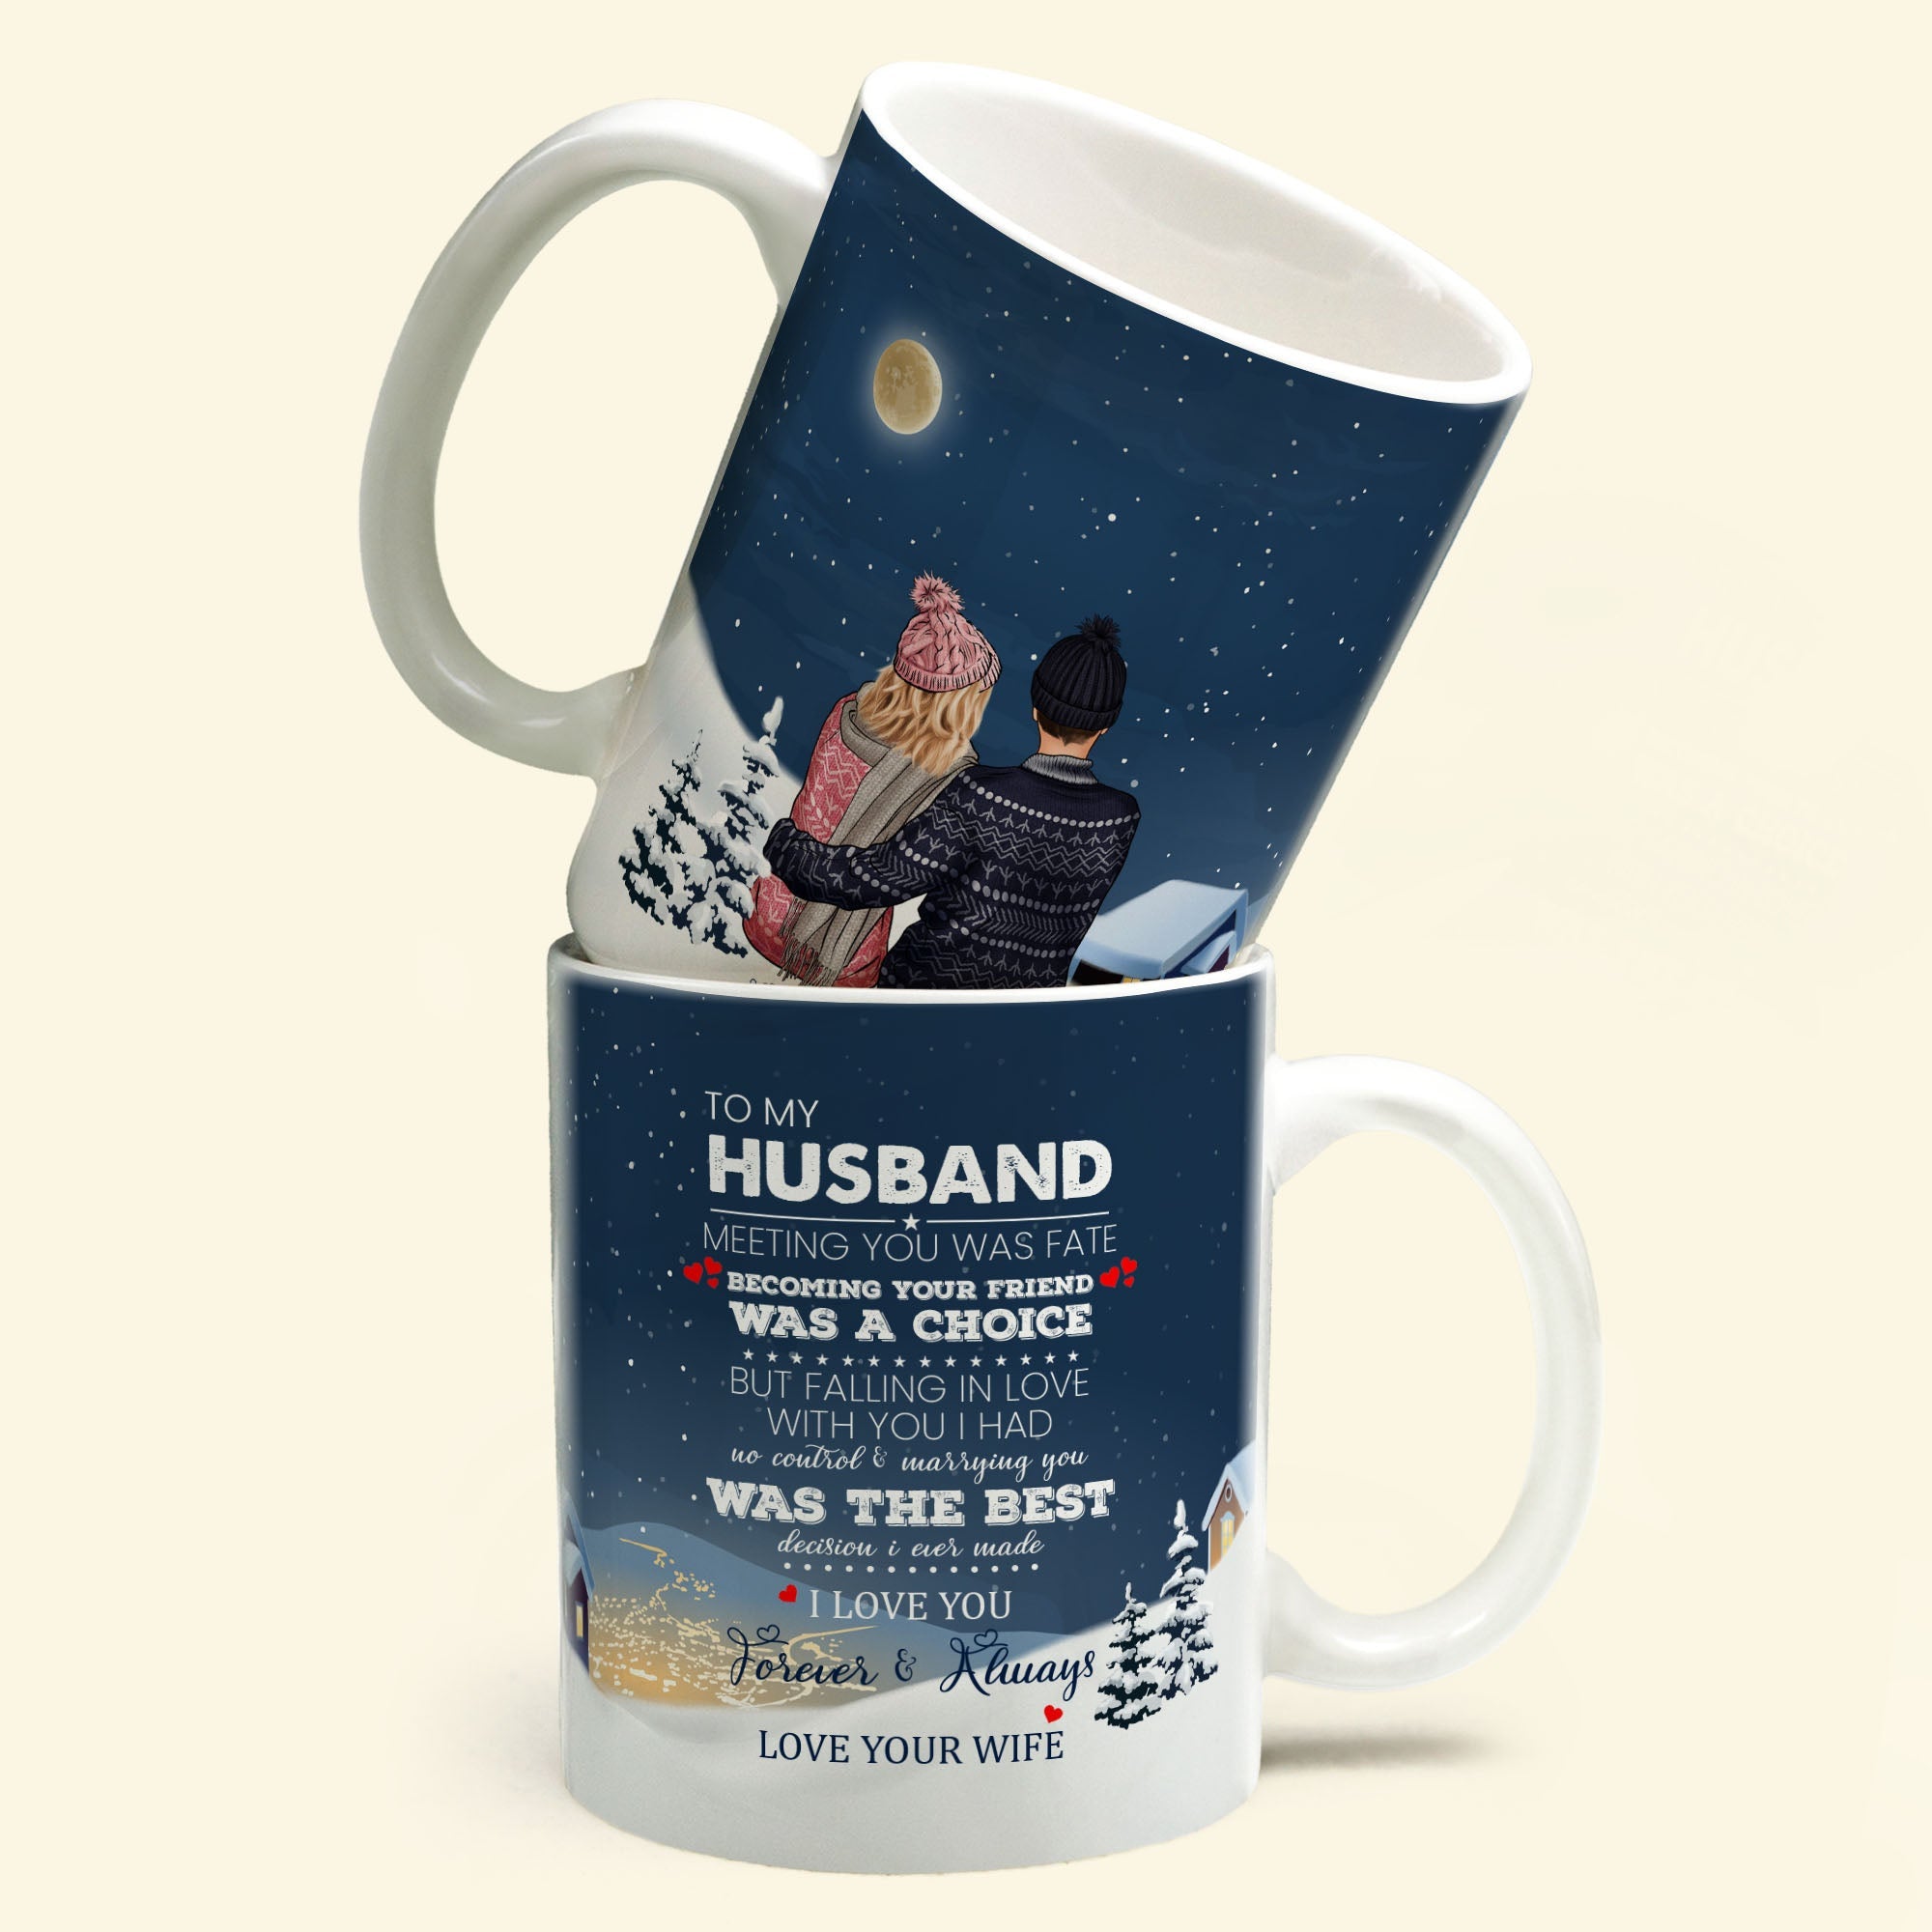 I Love You Forever & Always - Personalized Mug - Christmas Gift For Husband, Wife